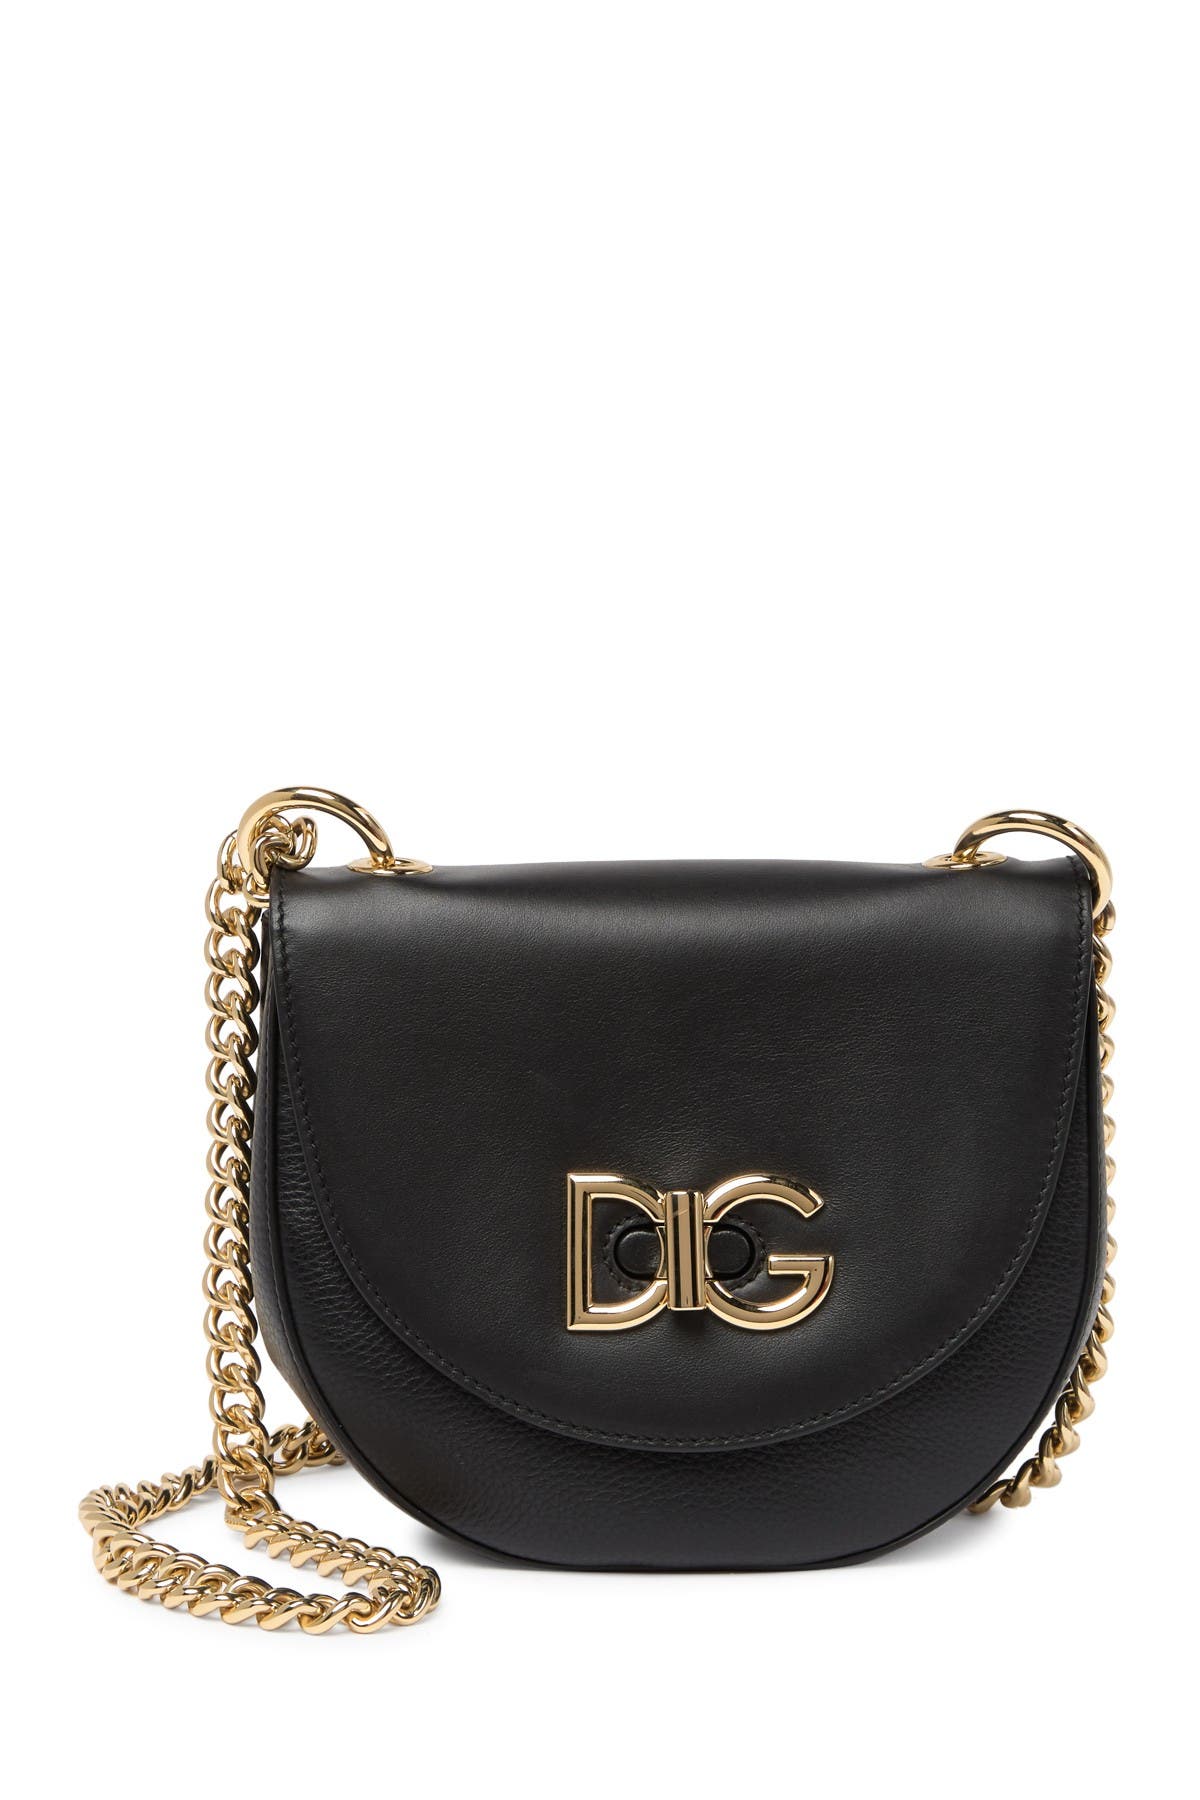 d&g luggage